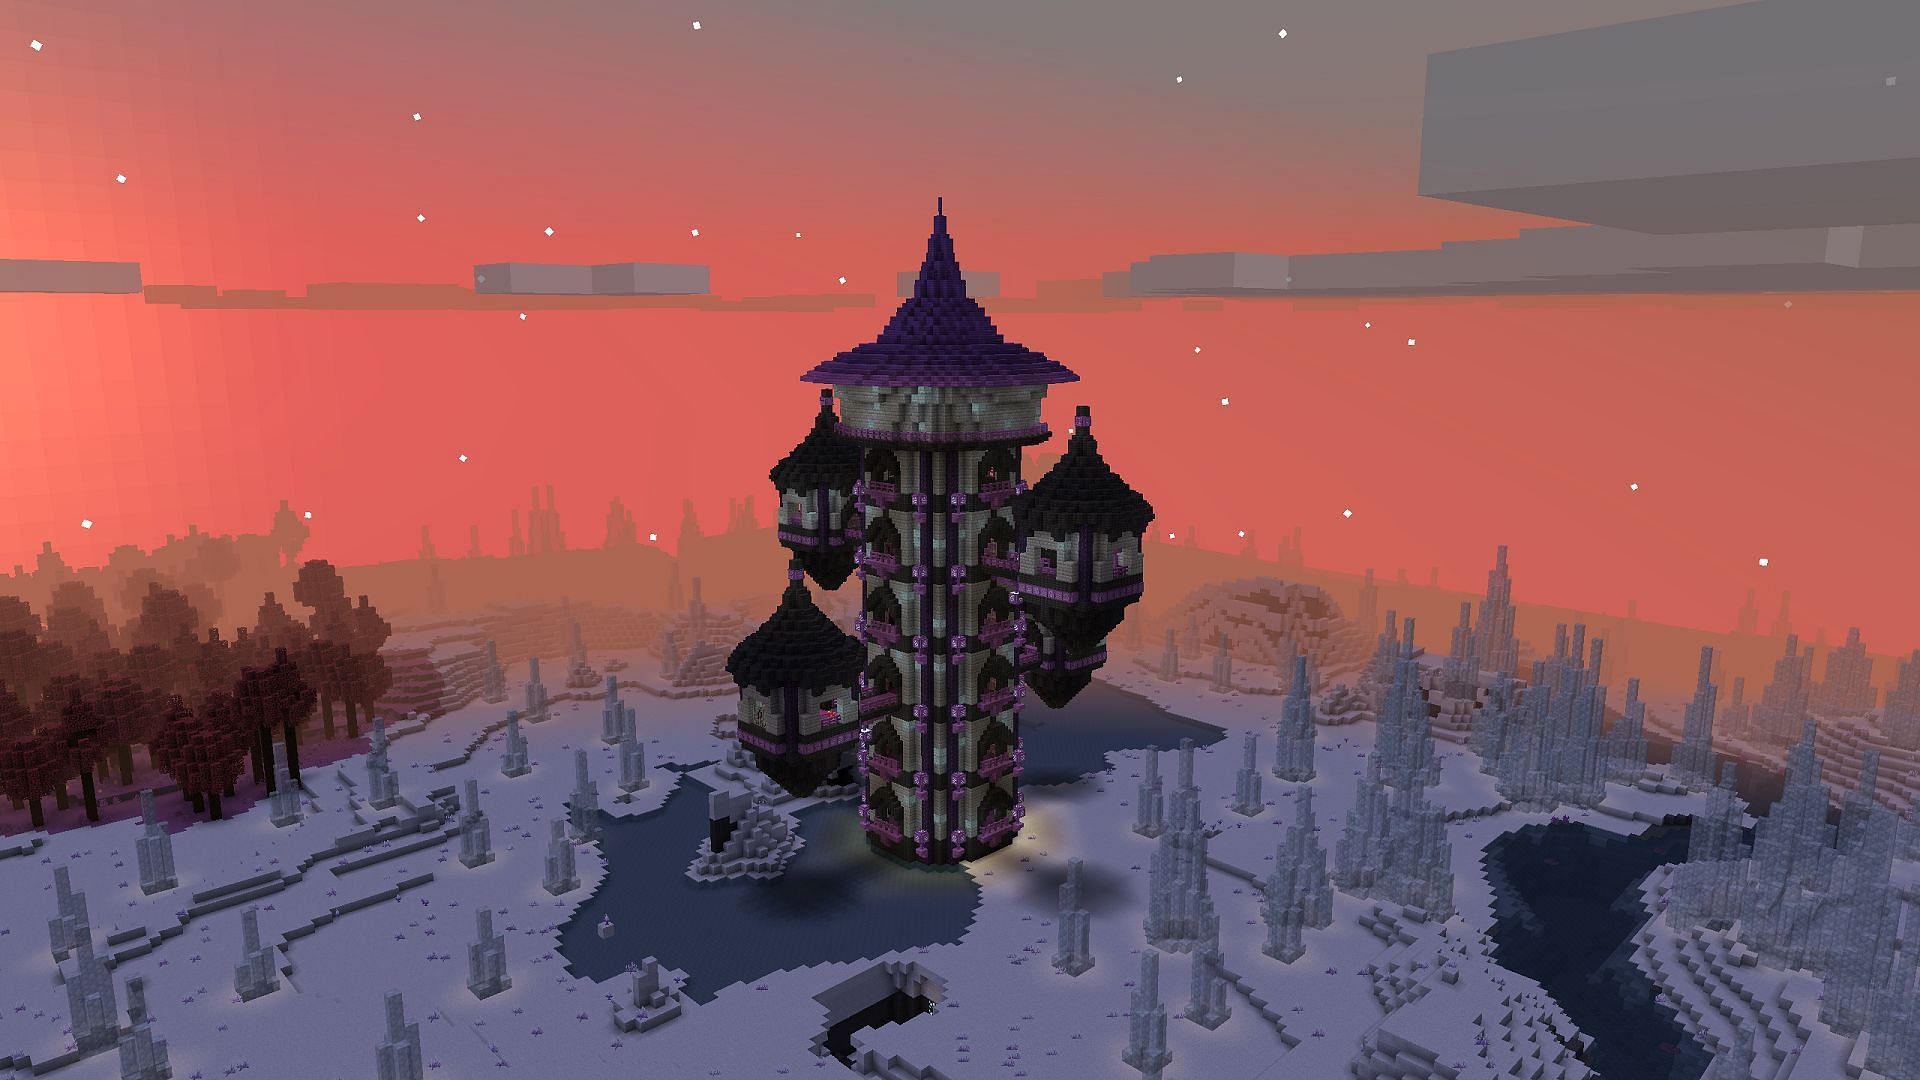 The Blinding Tower as seen in the Minecraft mod Blue Skies (Image via ModdingLegacy)